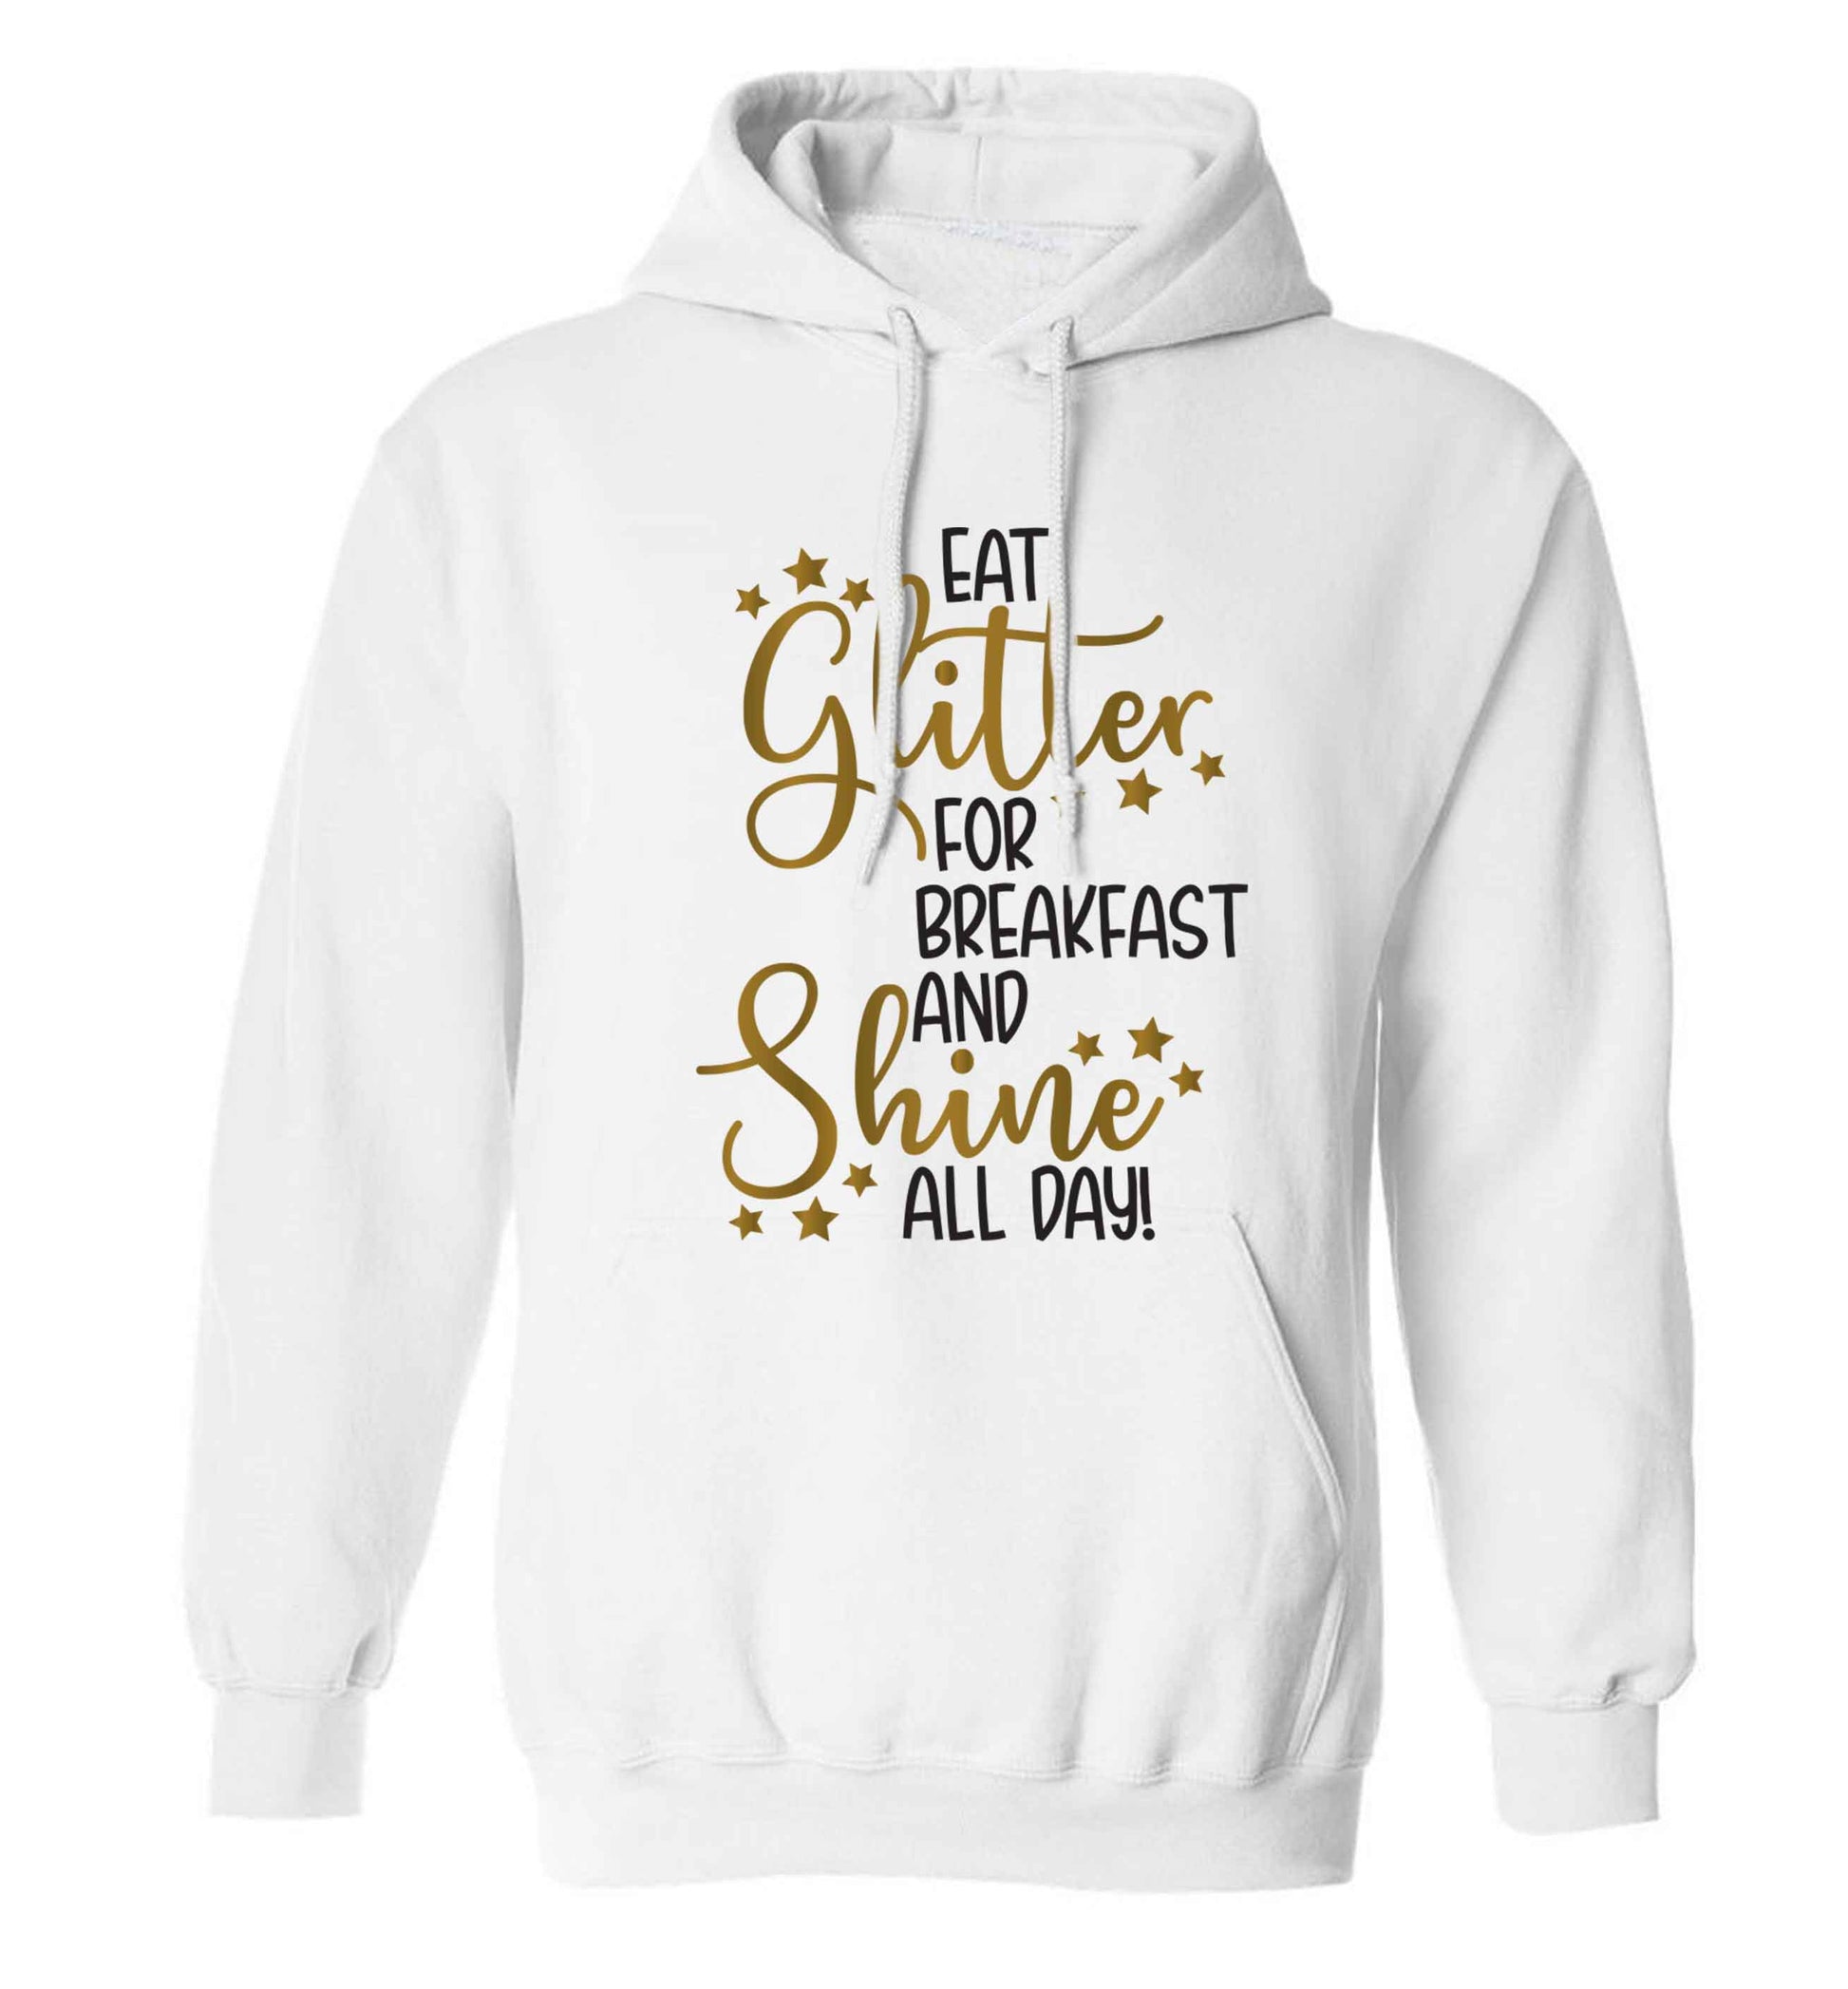 Eat glitter for breakfast and shine all day adults unisex white hoodie 2XL